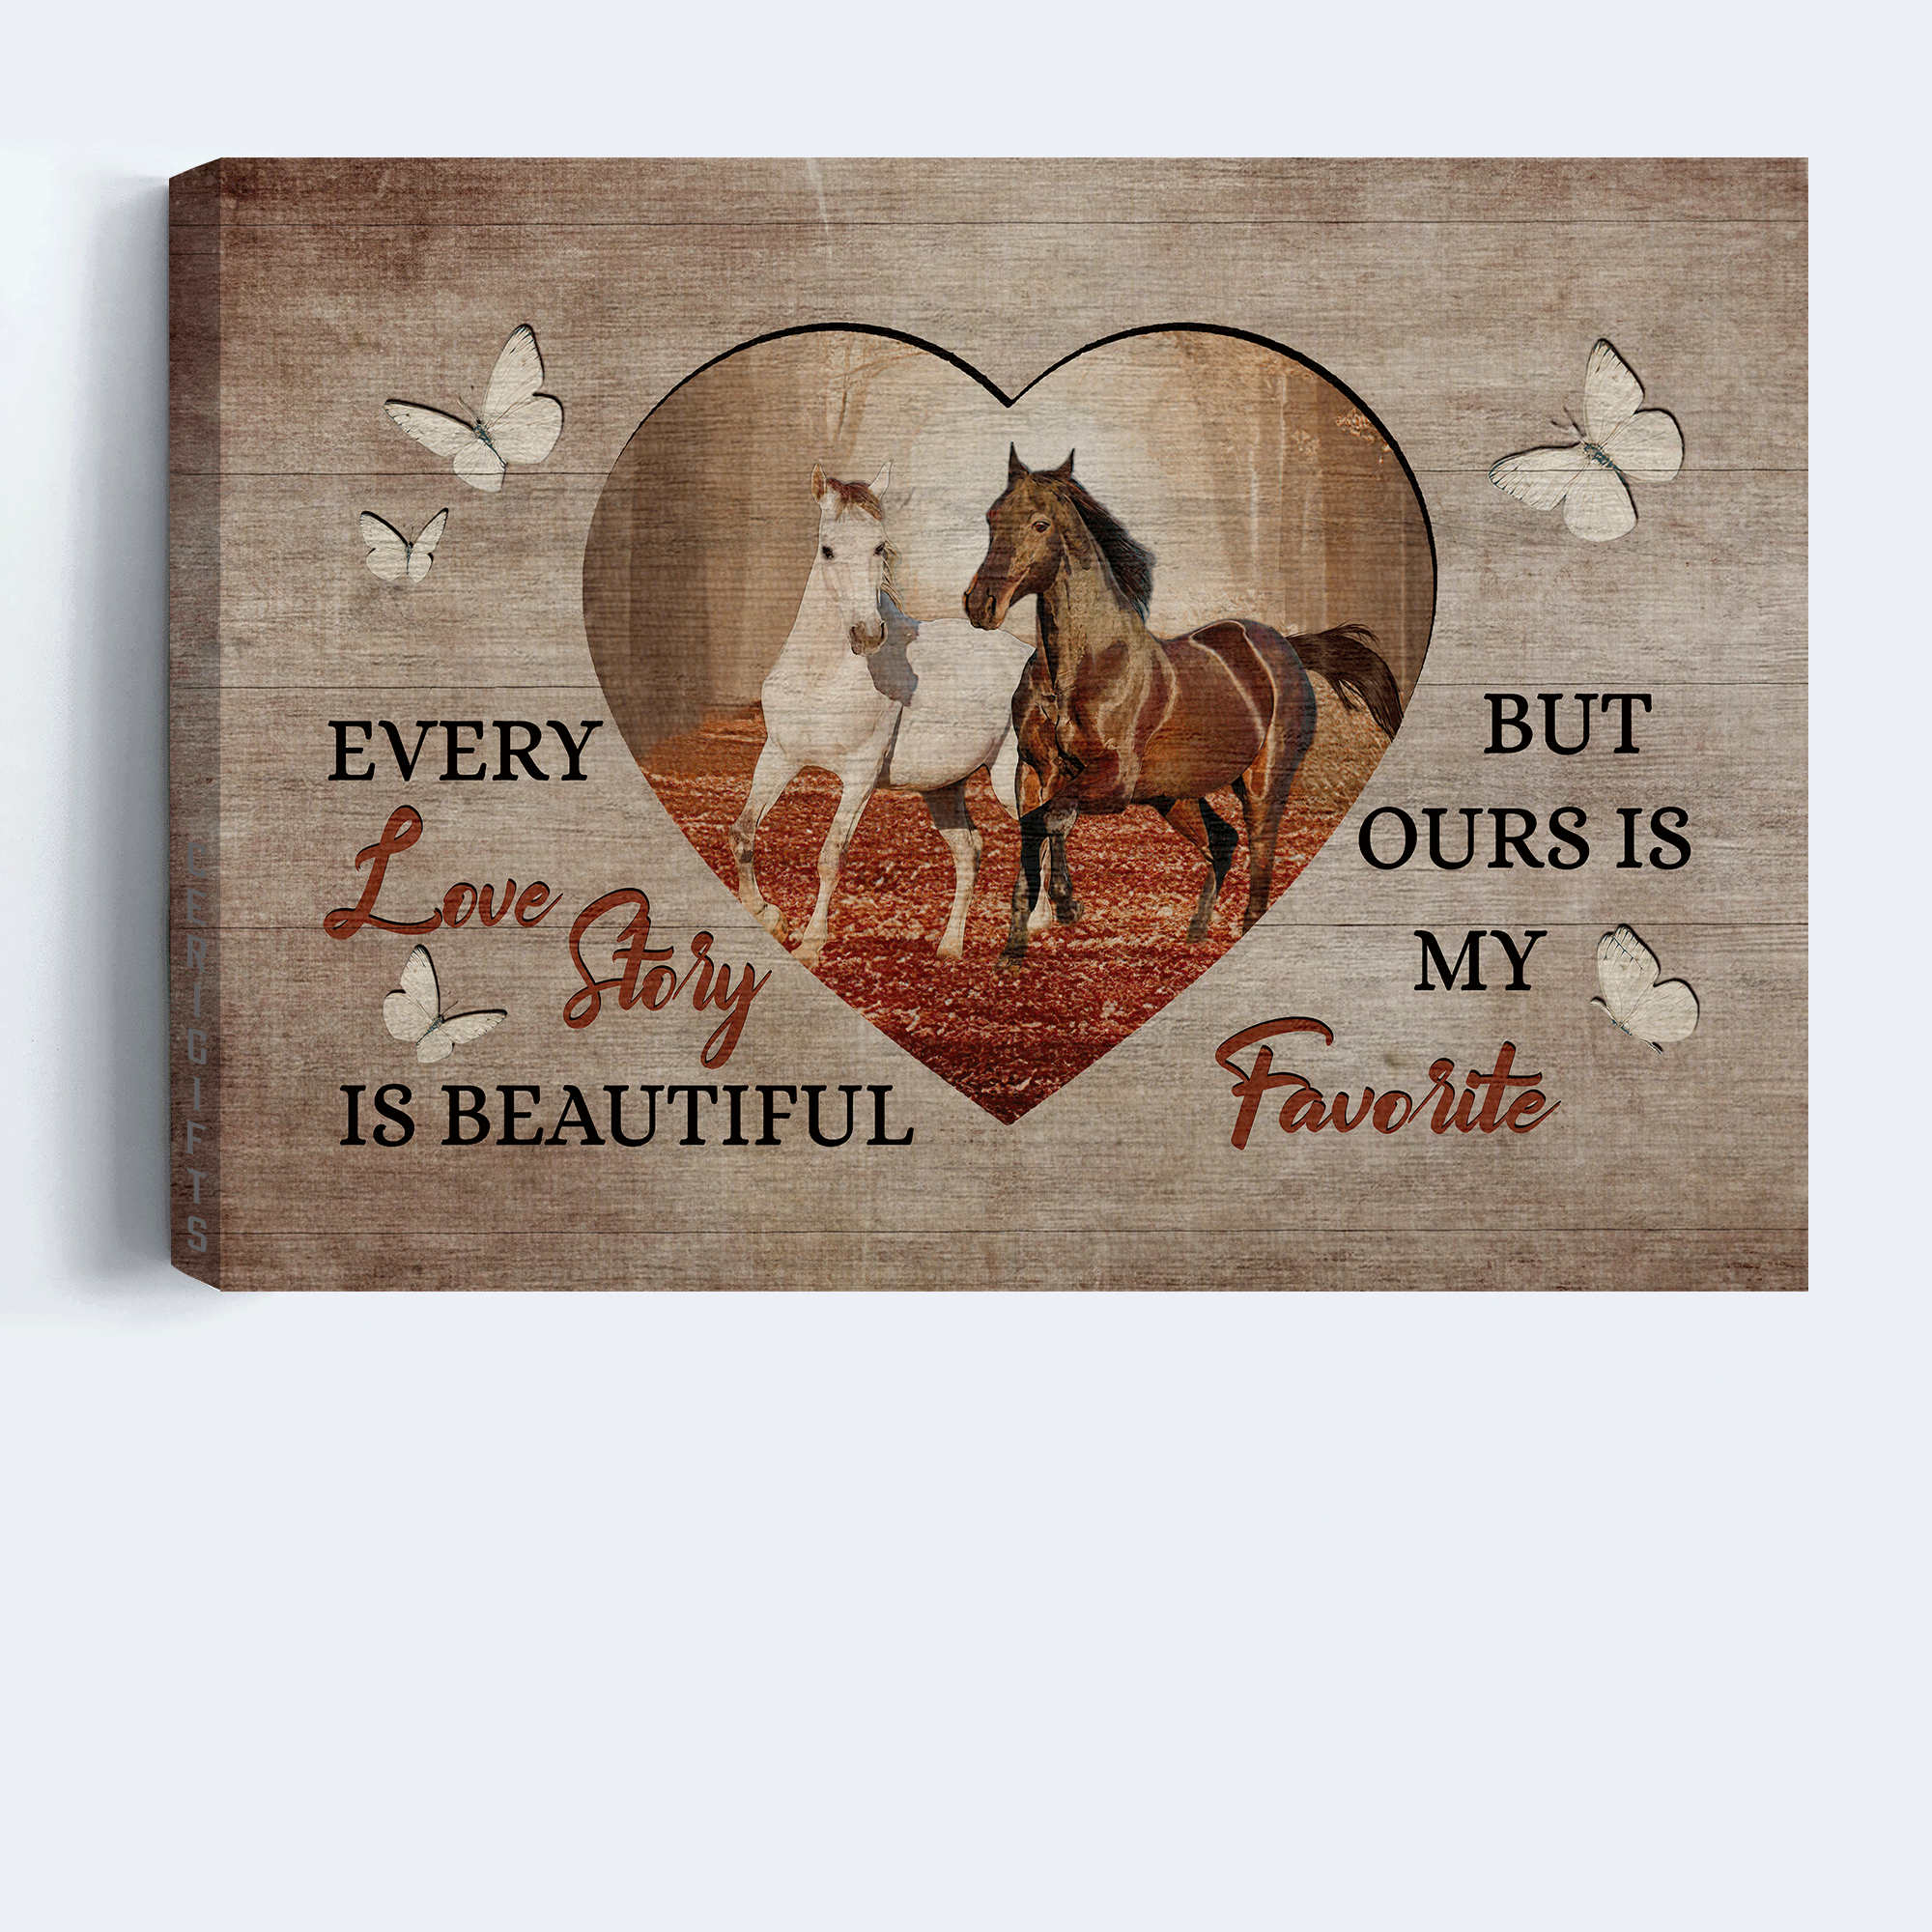 Family Landscape Canvas - Horse drawing, Autumn forest, Heart shape canvas - Every love story is beautiful Landscape Canvas - Gift for members family - Amzanimalsgift